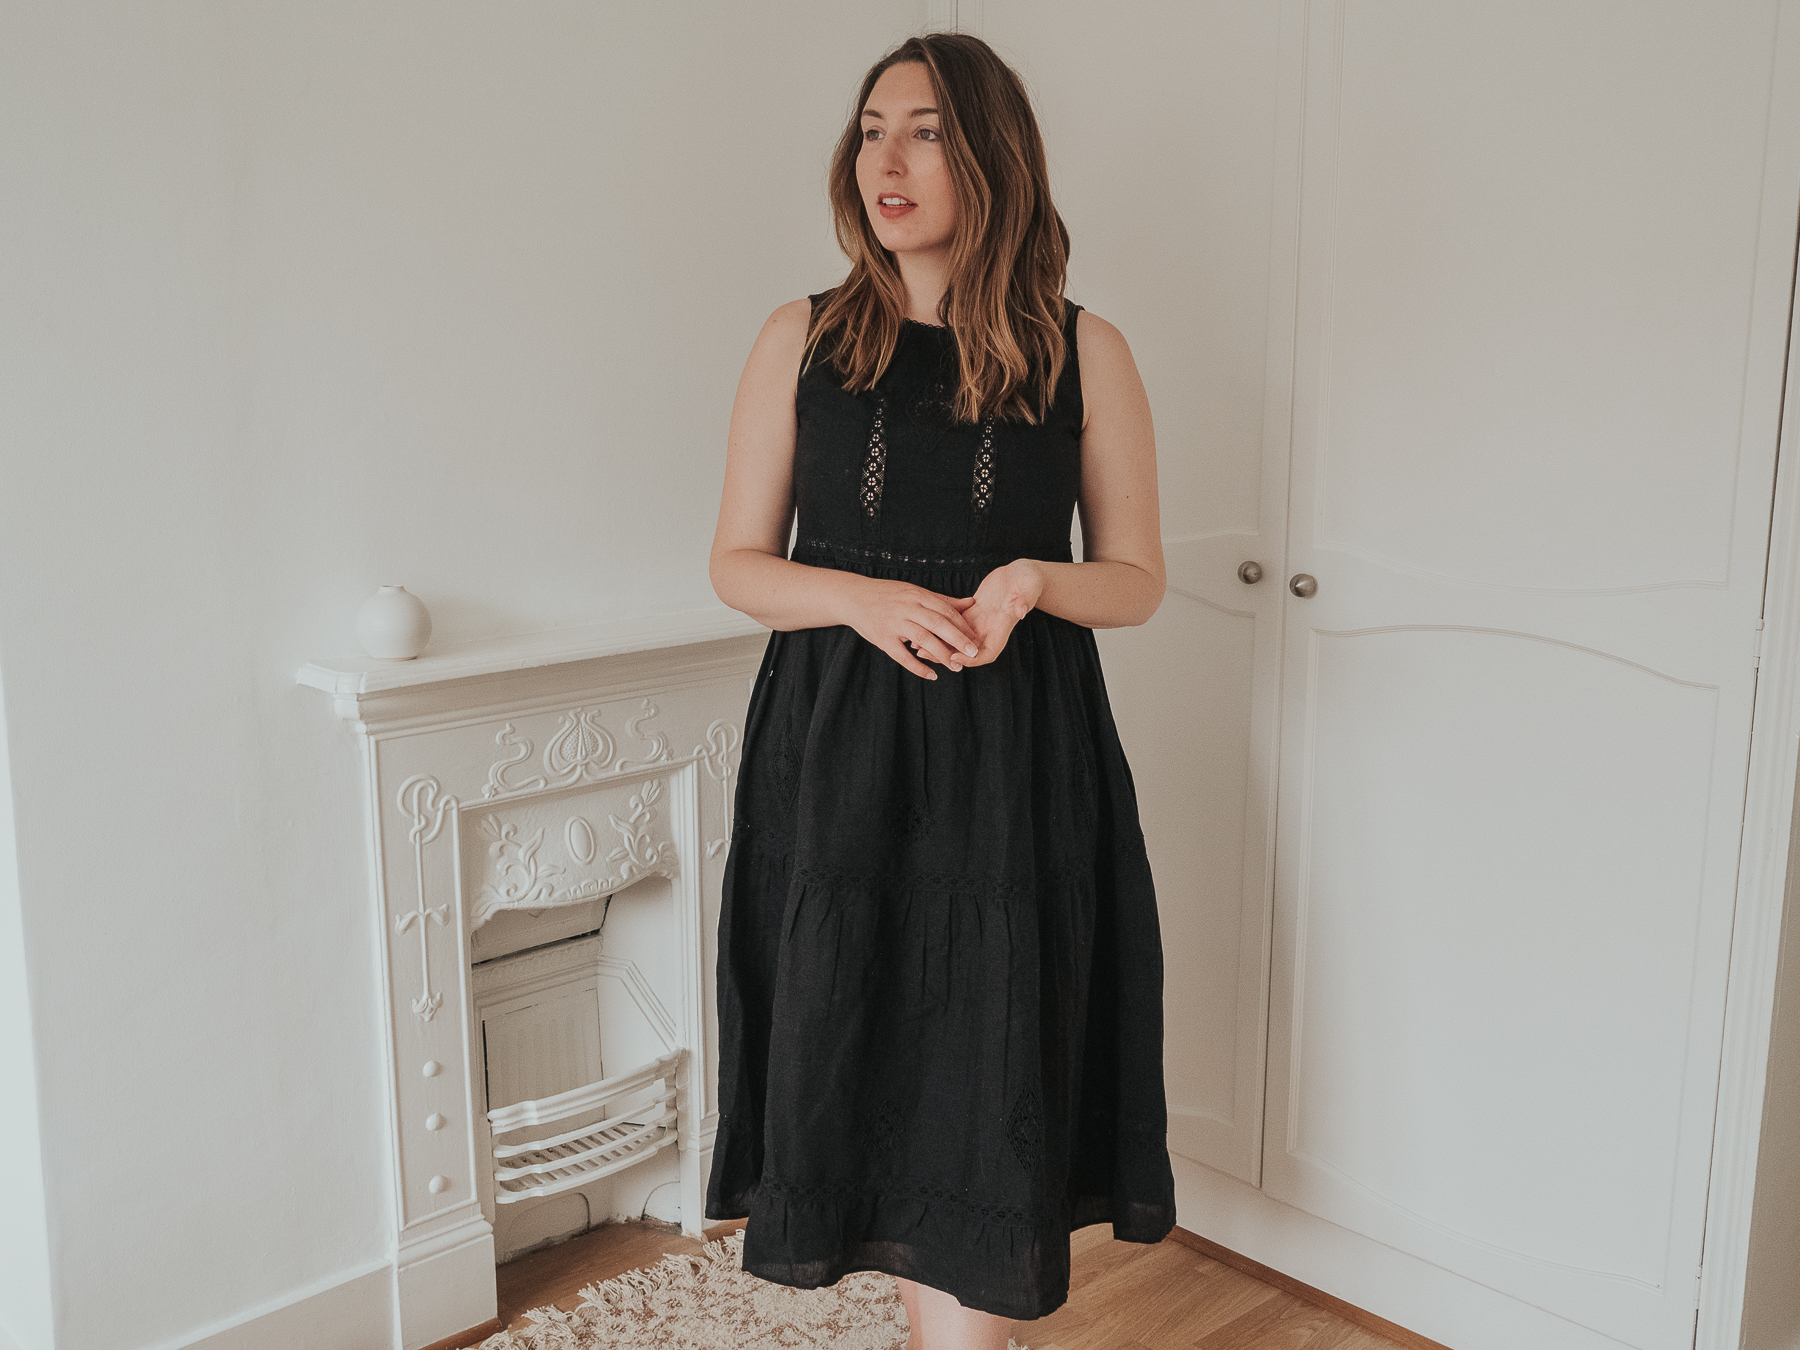 Try on Trials: An Honest Review of Sezane (Dresses, Tops, & Accessories)